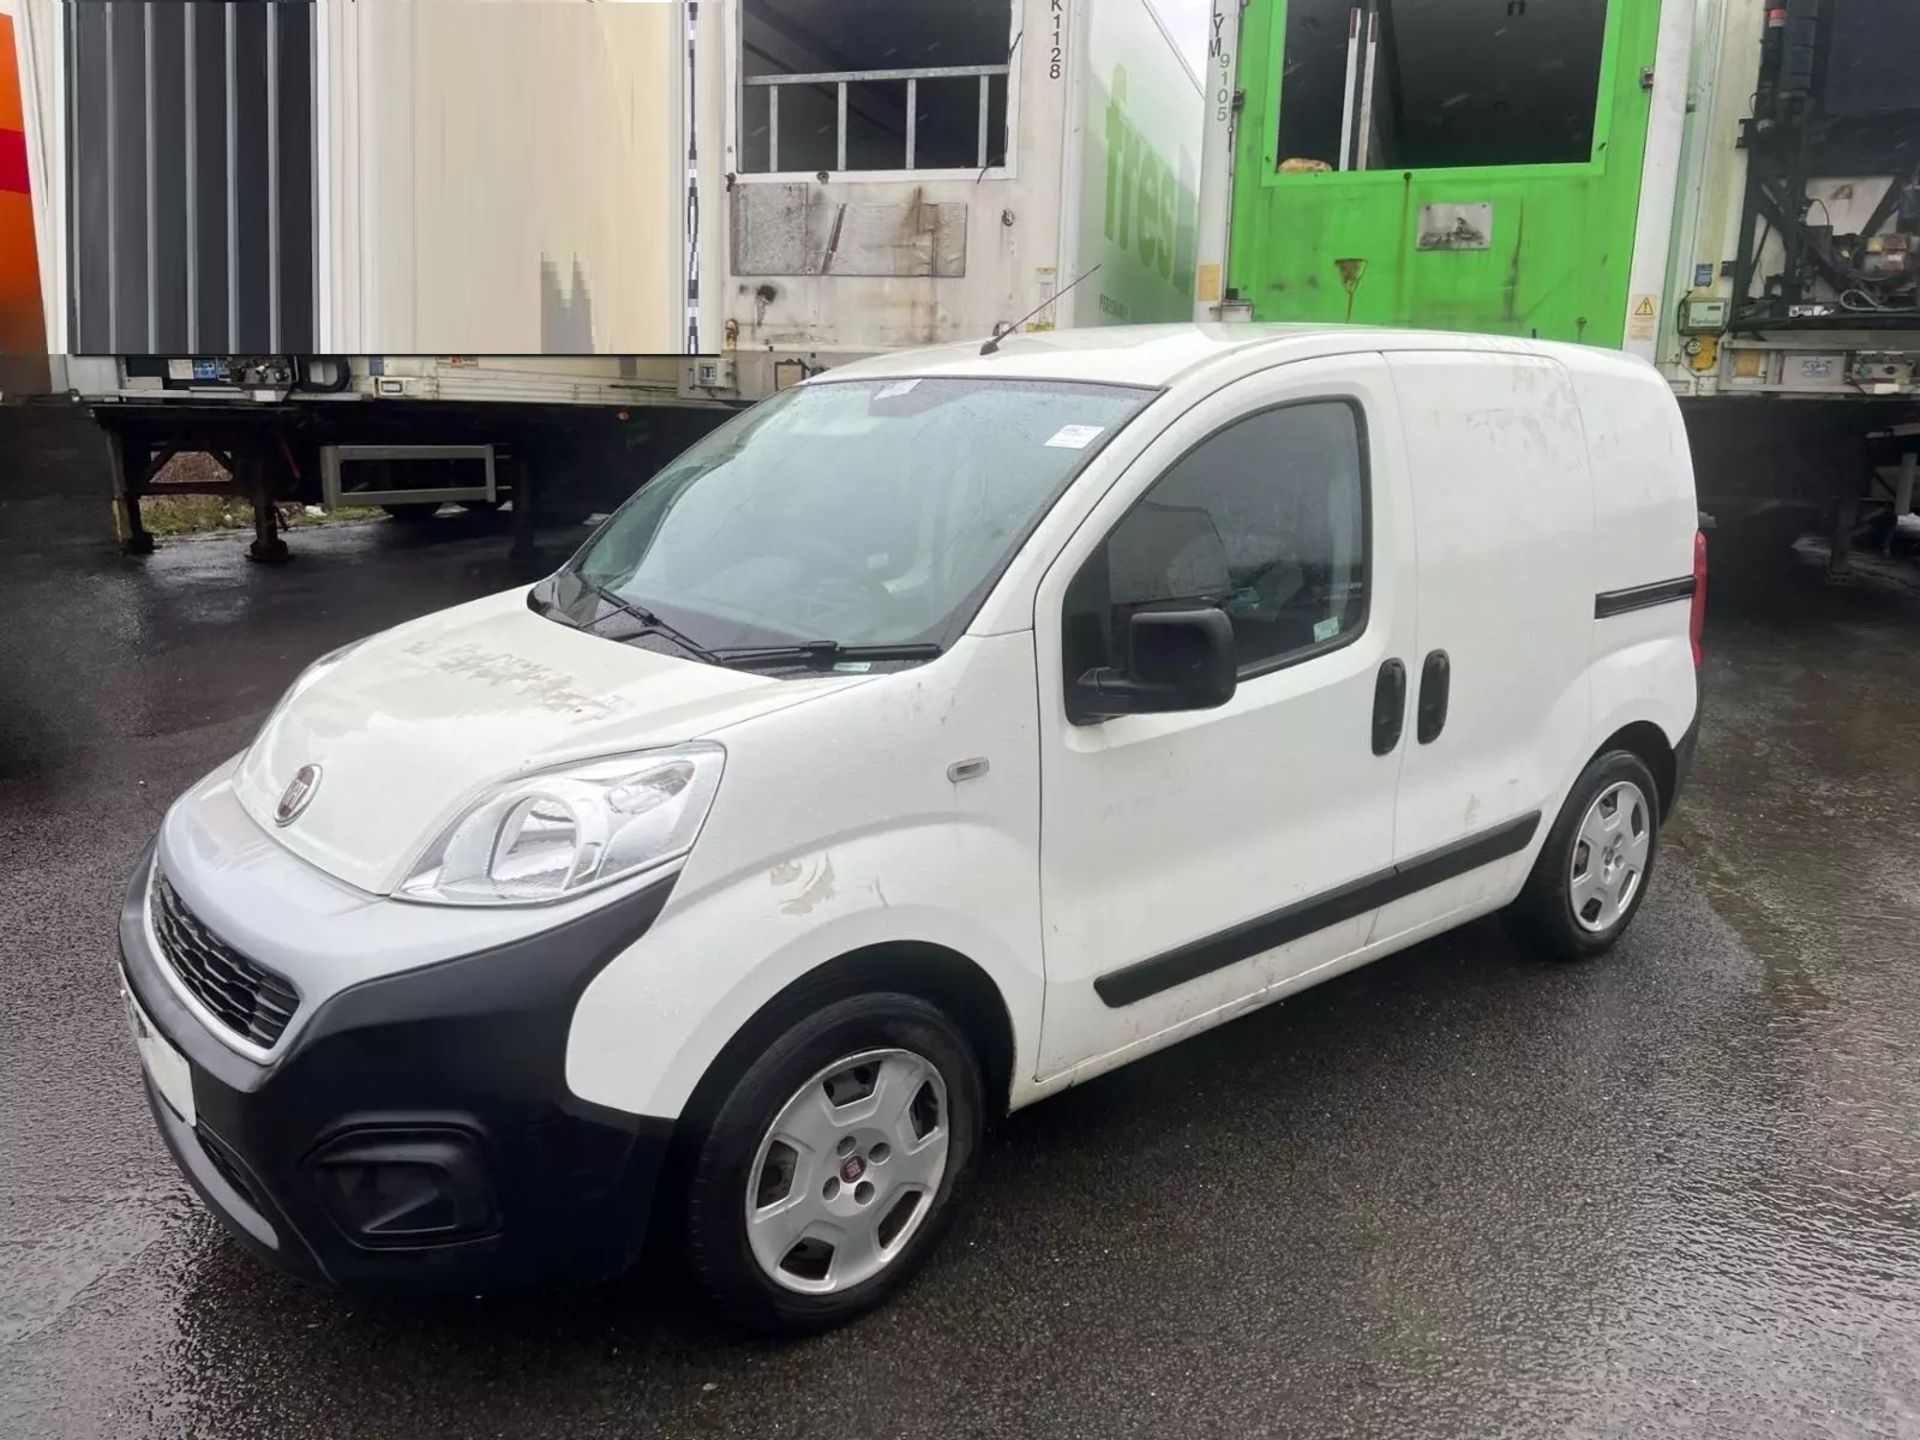 FIAT FIORINO SX 1.3 HDI VAN 2019 - LOADED WITH FEATURES, SOLD FOR SPARES OR REPAIRS